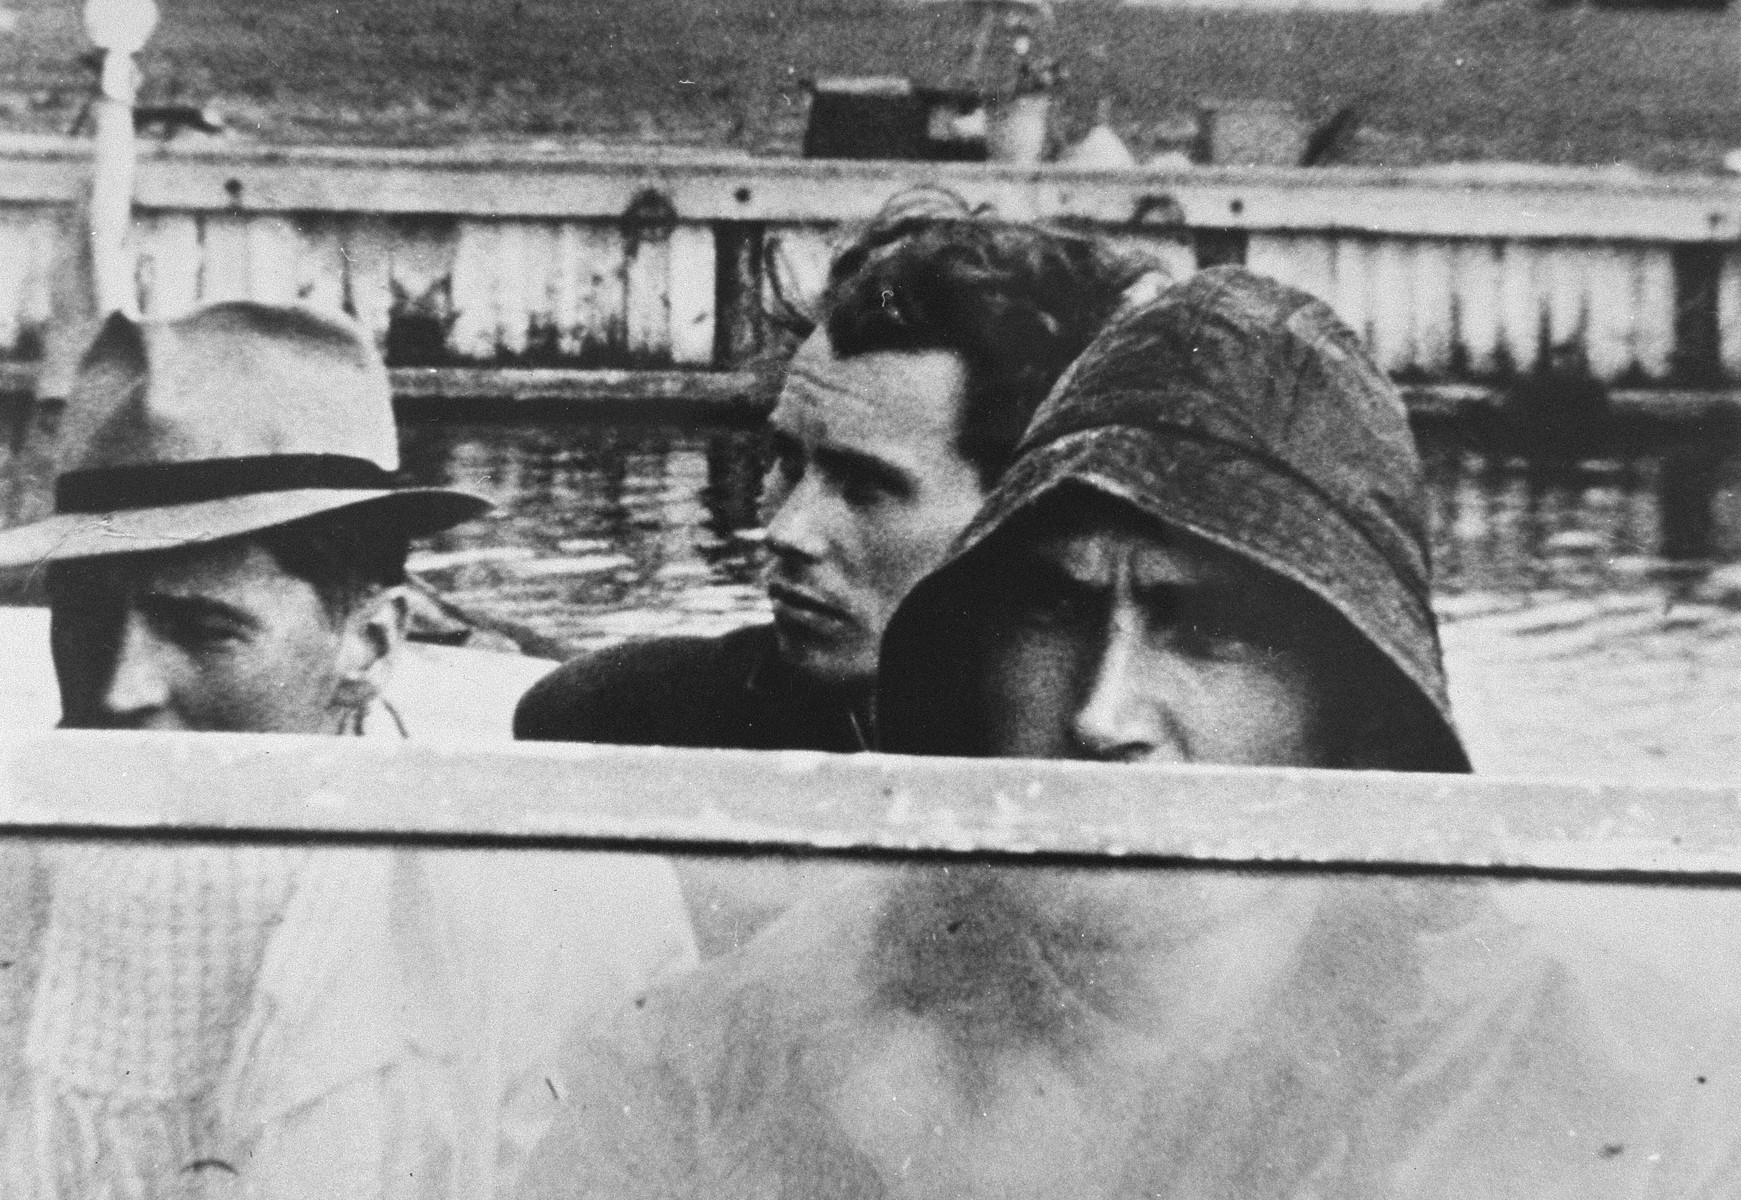 Close-up of Danish rescuers on board a boat.